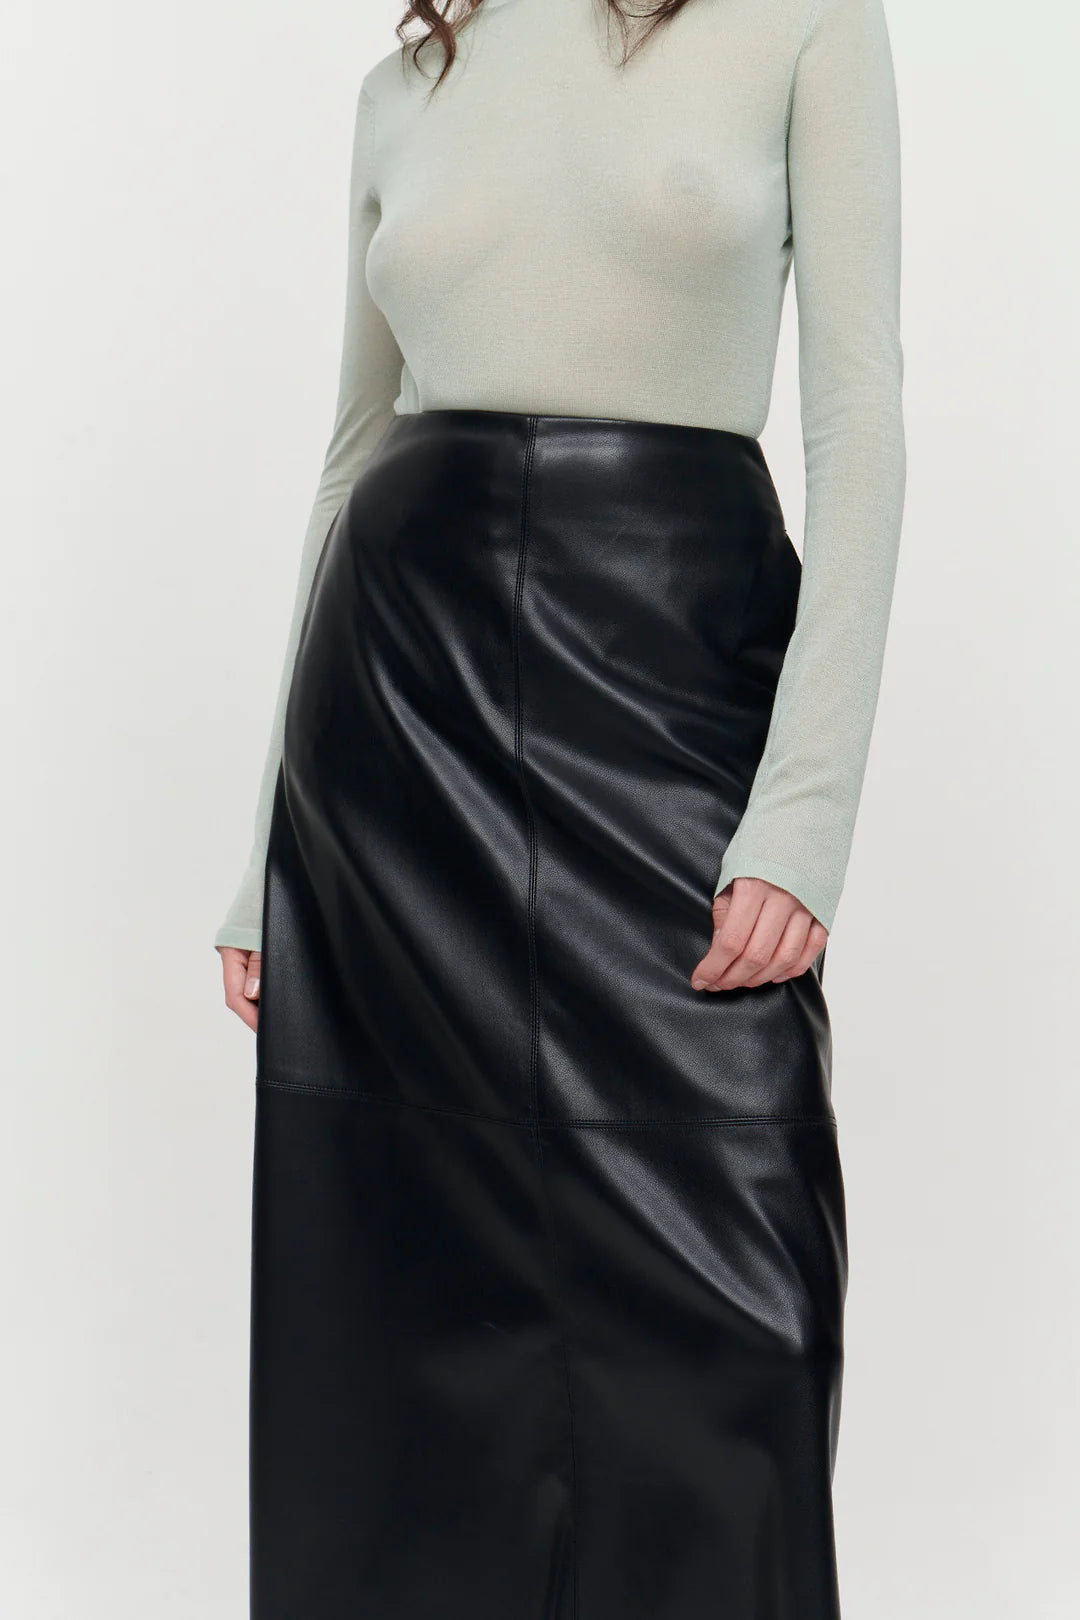 A line midi vegan leather black skirt with panel features and a centre back zip fastening with inseam side pockets